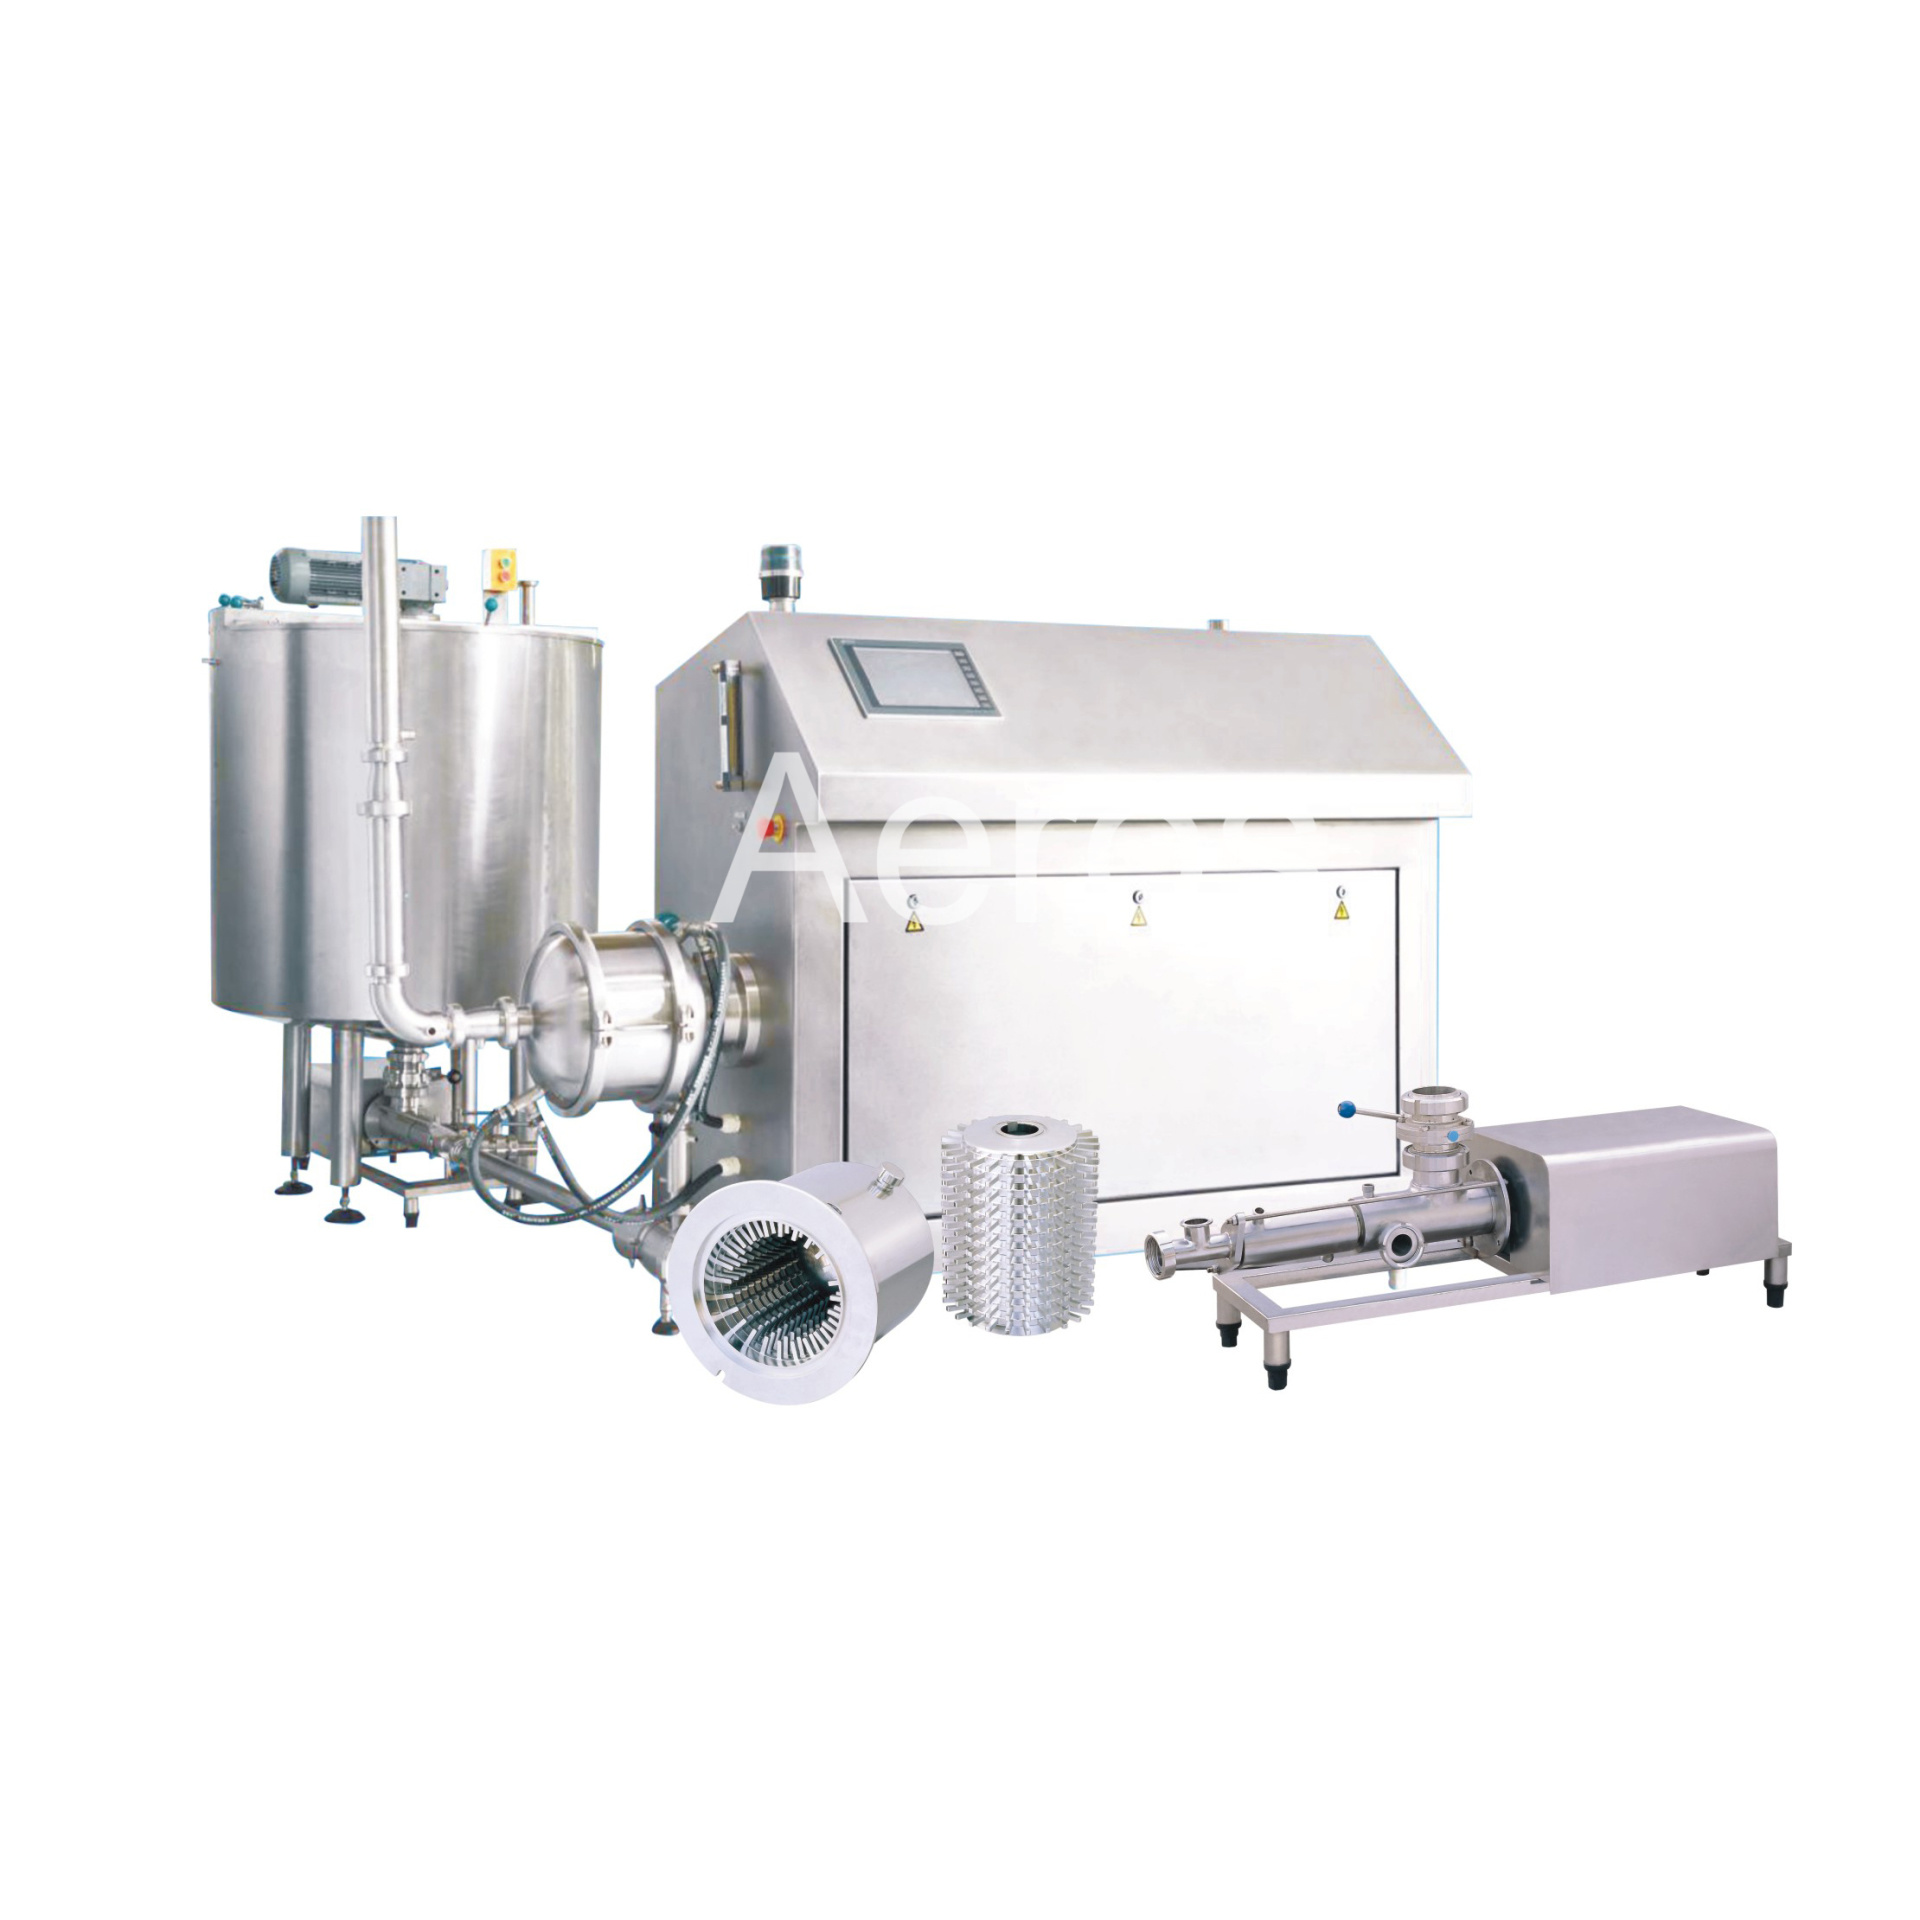 Chemical foaming system